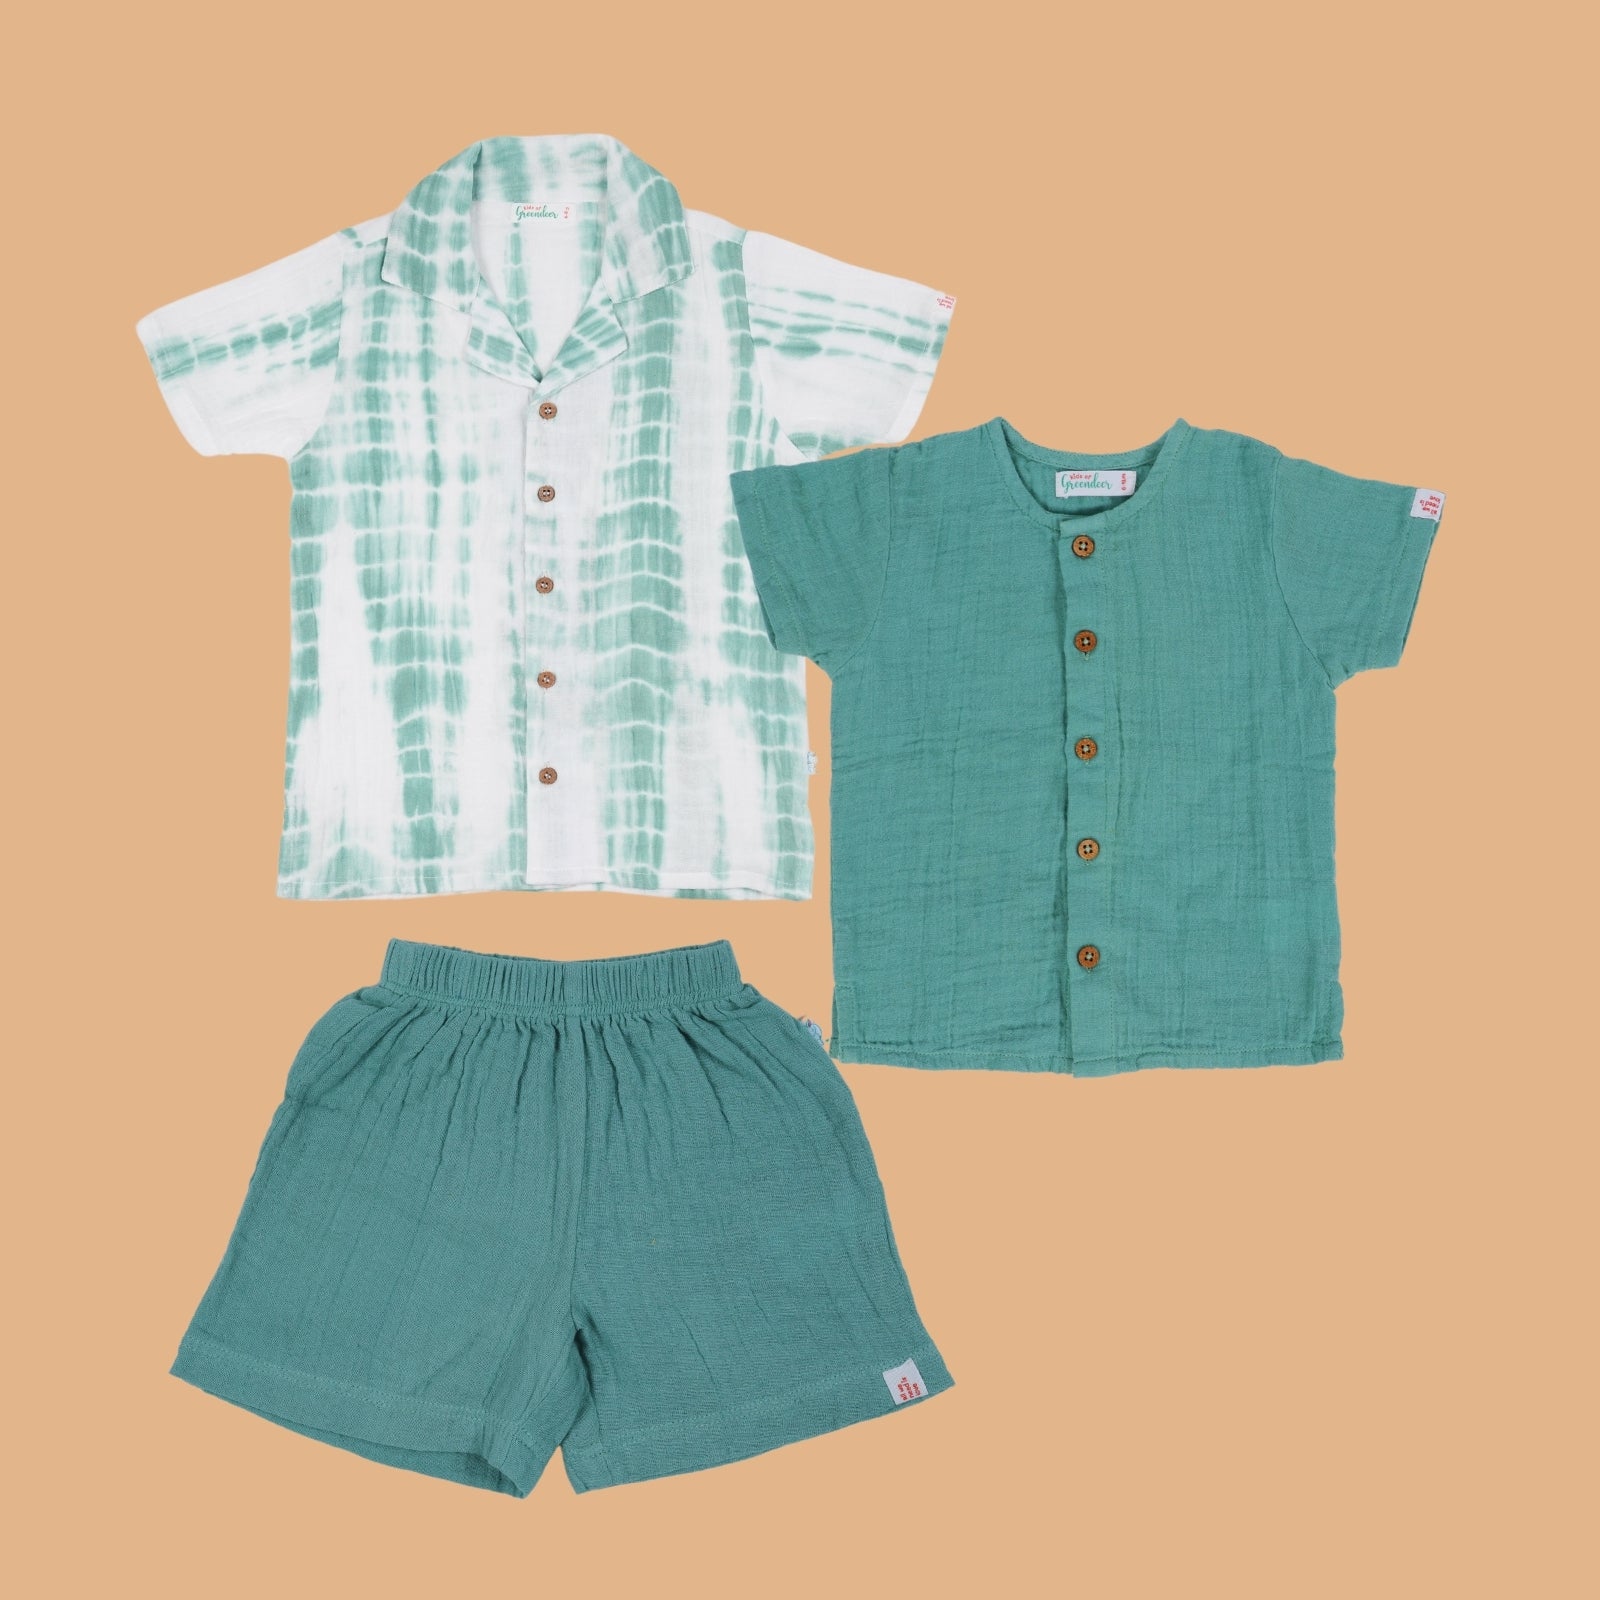 Resort Front Open & Collar Shirt with Shorts Set of 3 Sea Weed